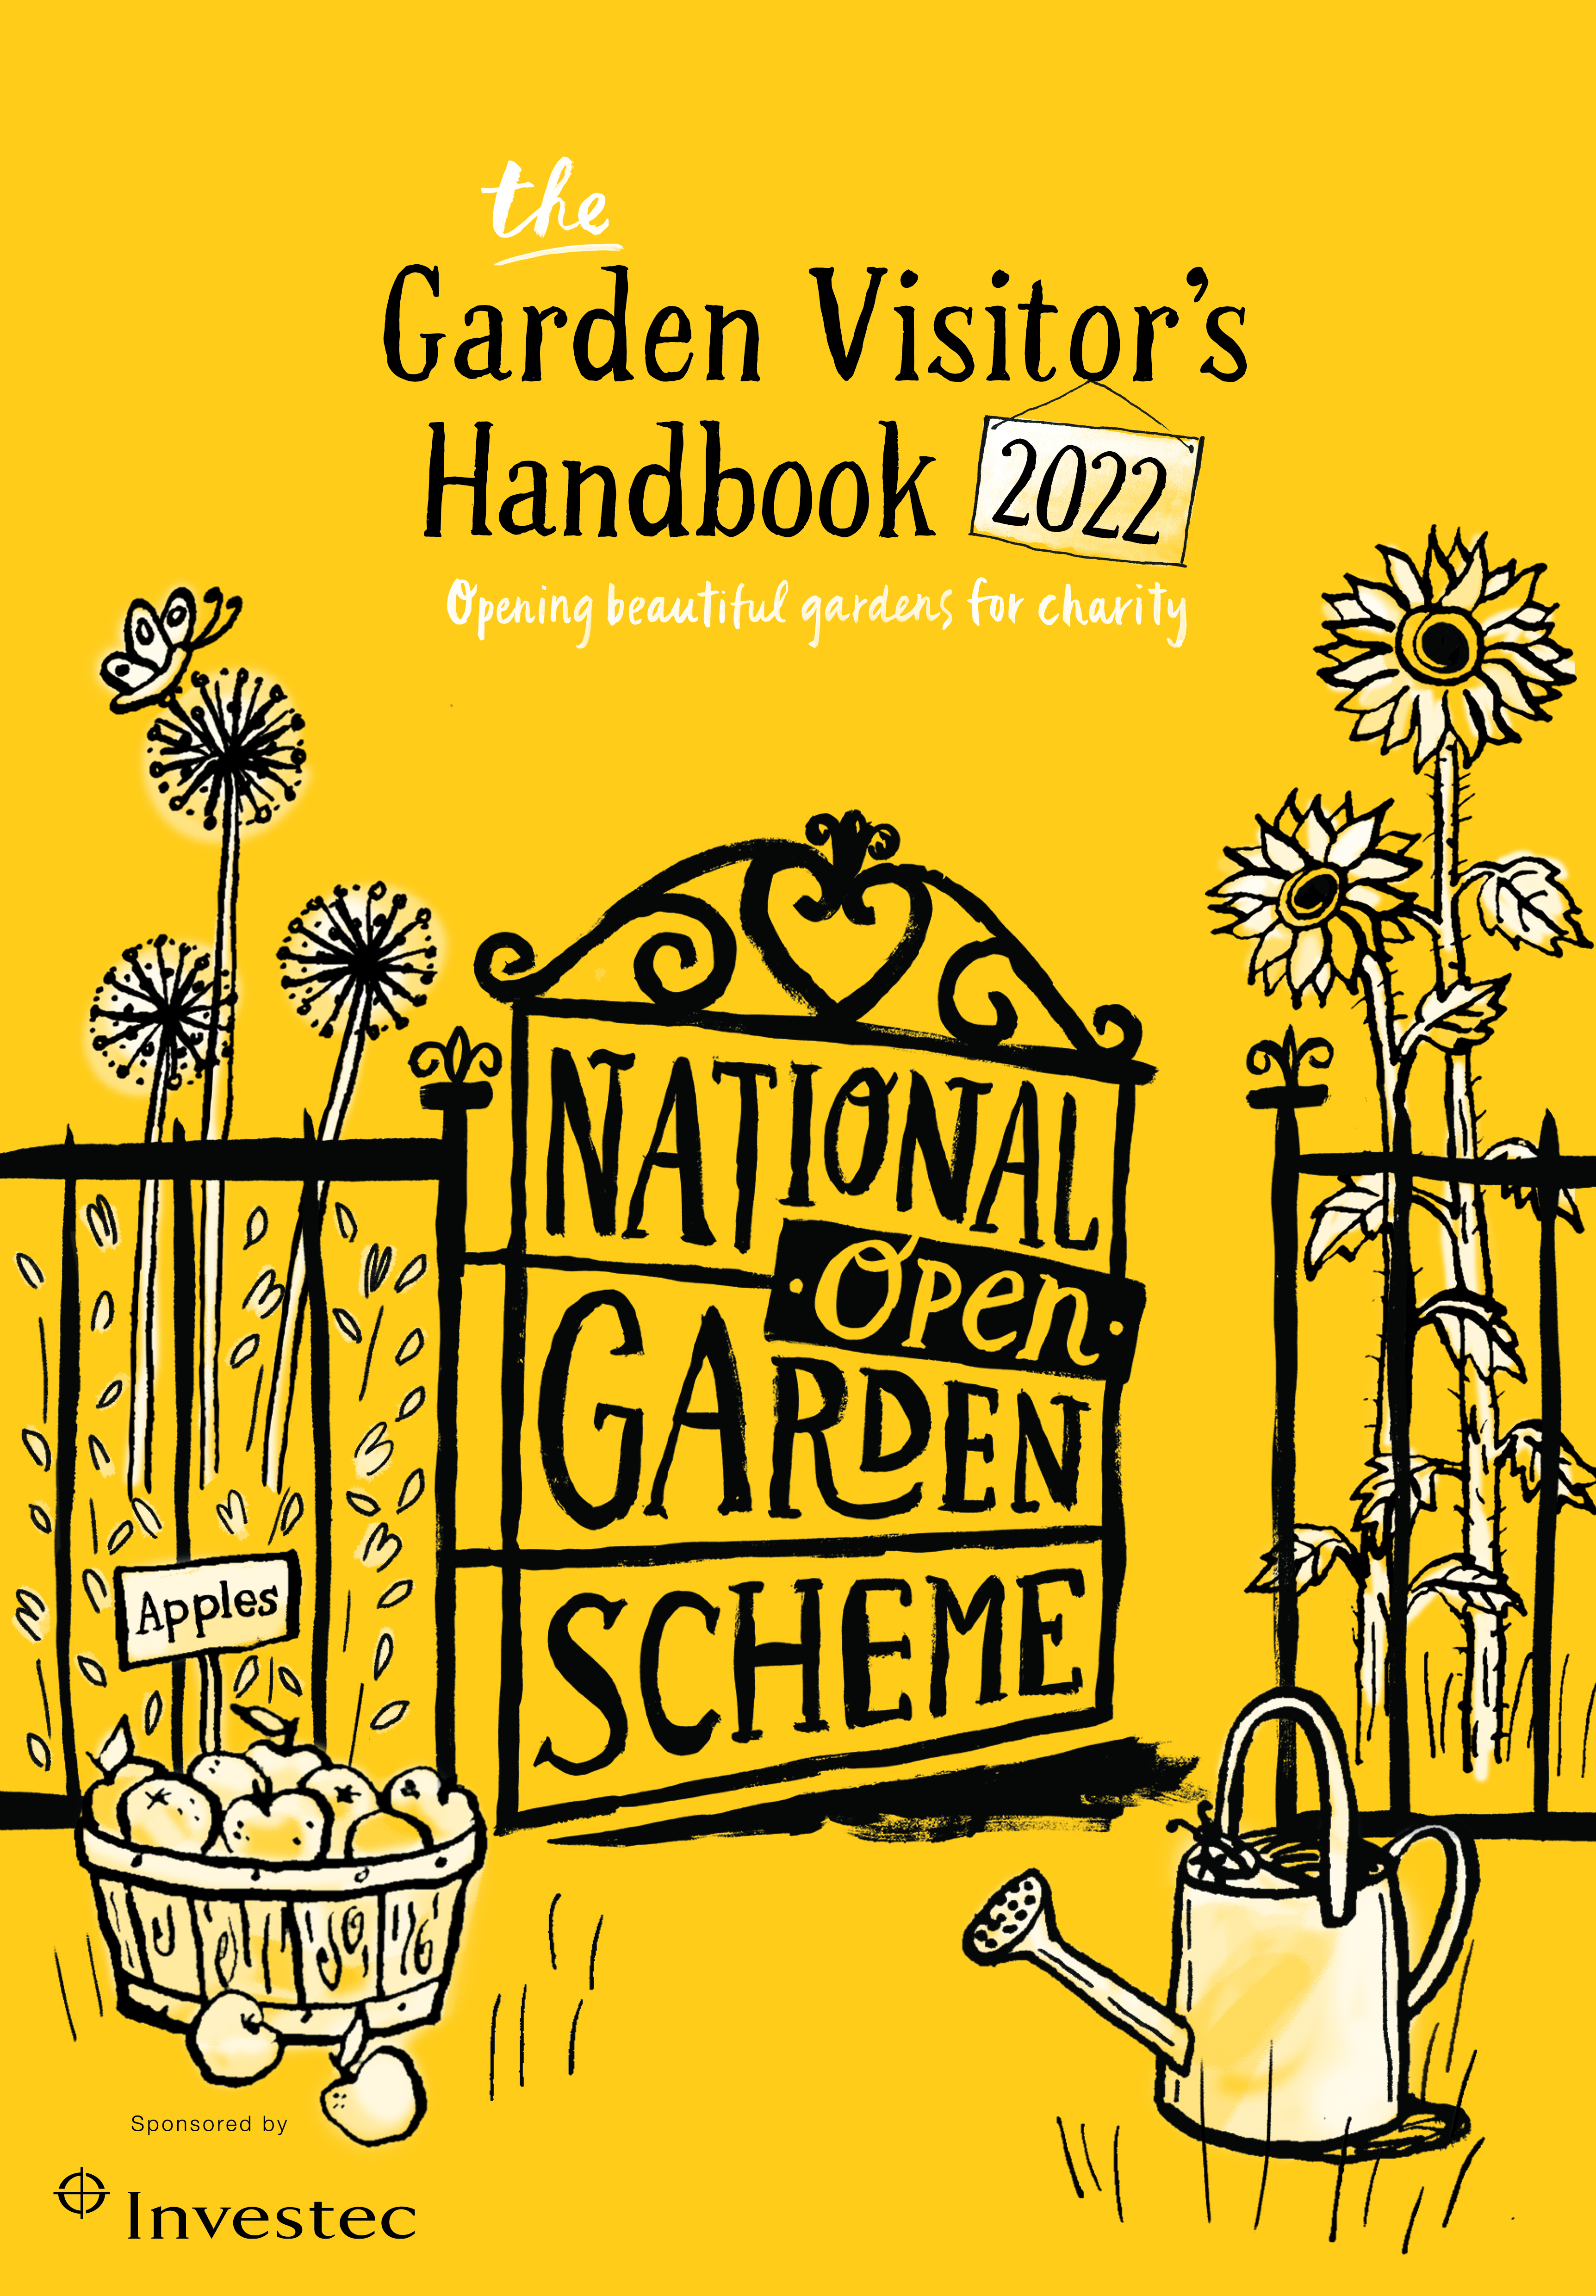 The front cover of the The National Garden Scheme's handbook. The book is yellow with an illustration of a gate opening on it.